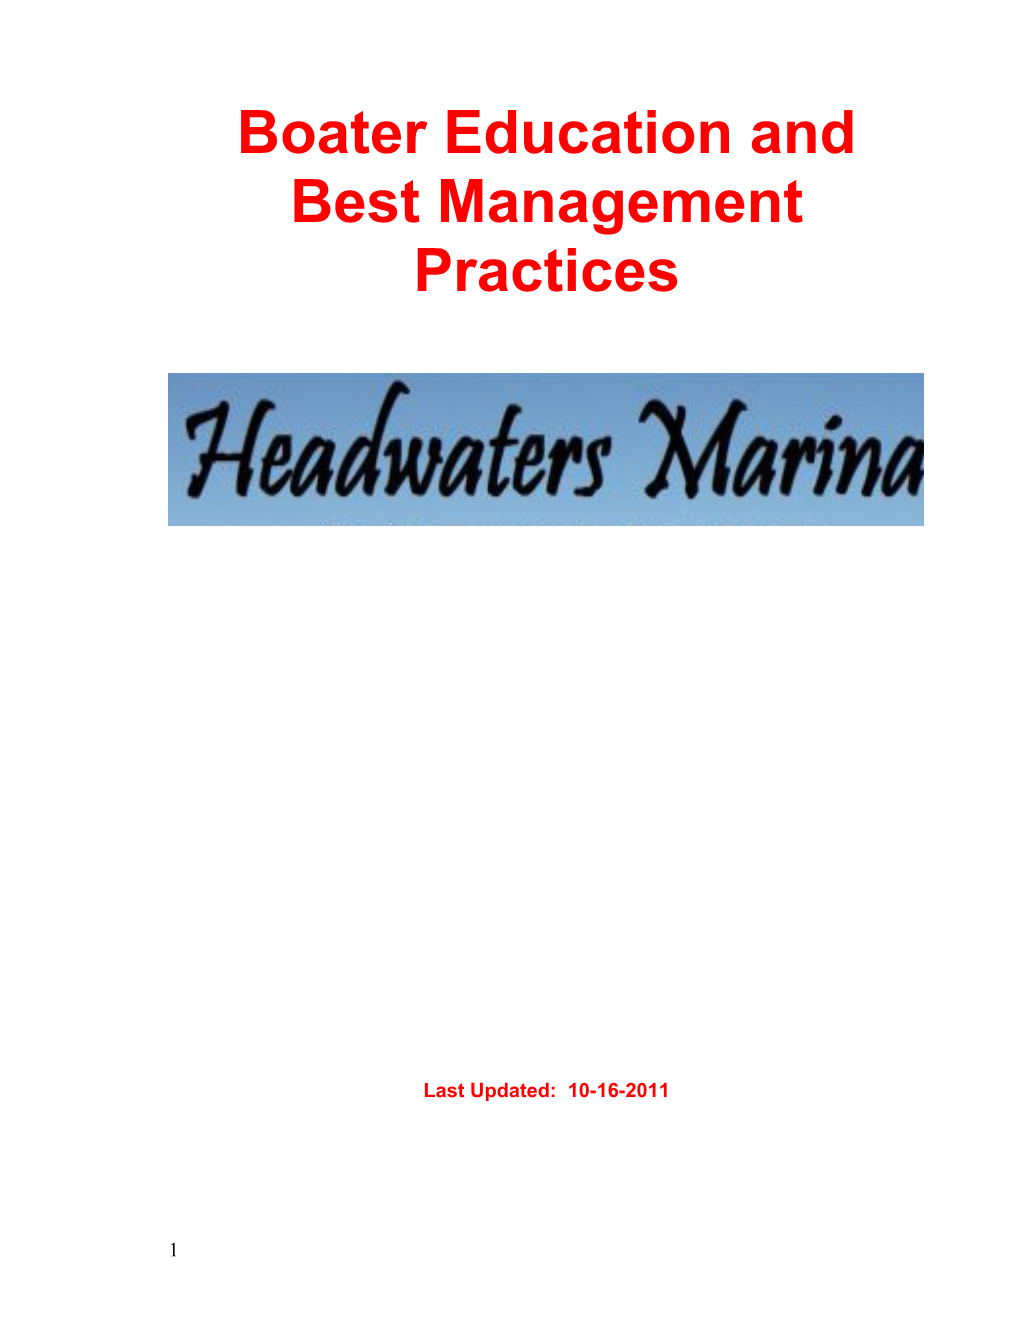 Boater Education and Best Management Practices